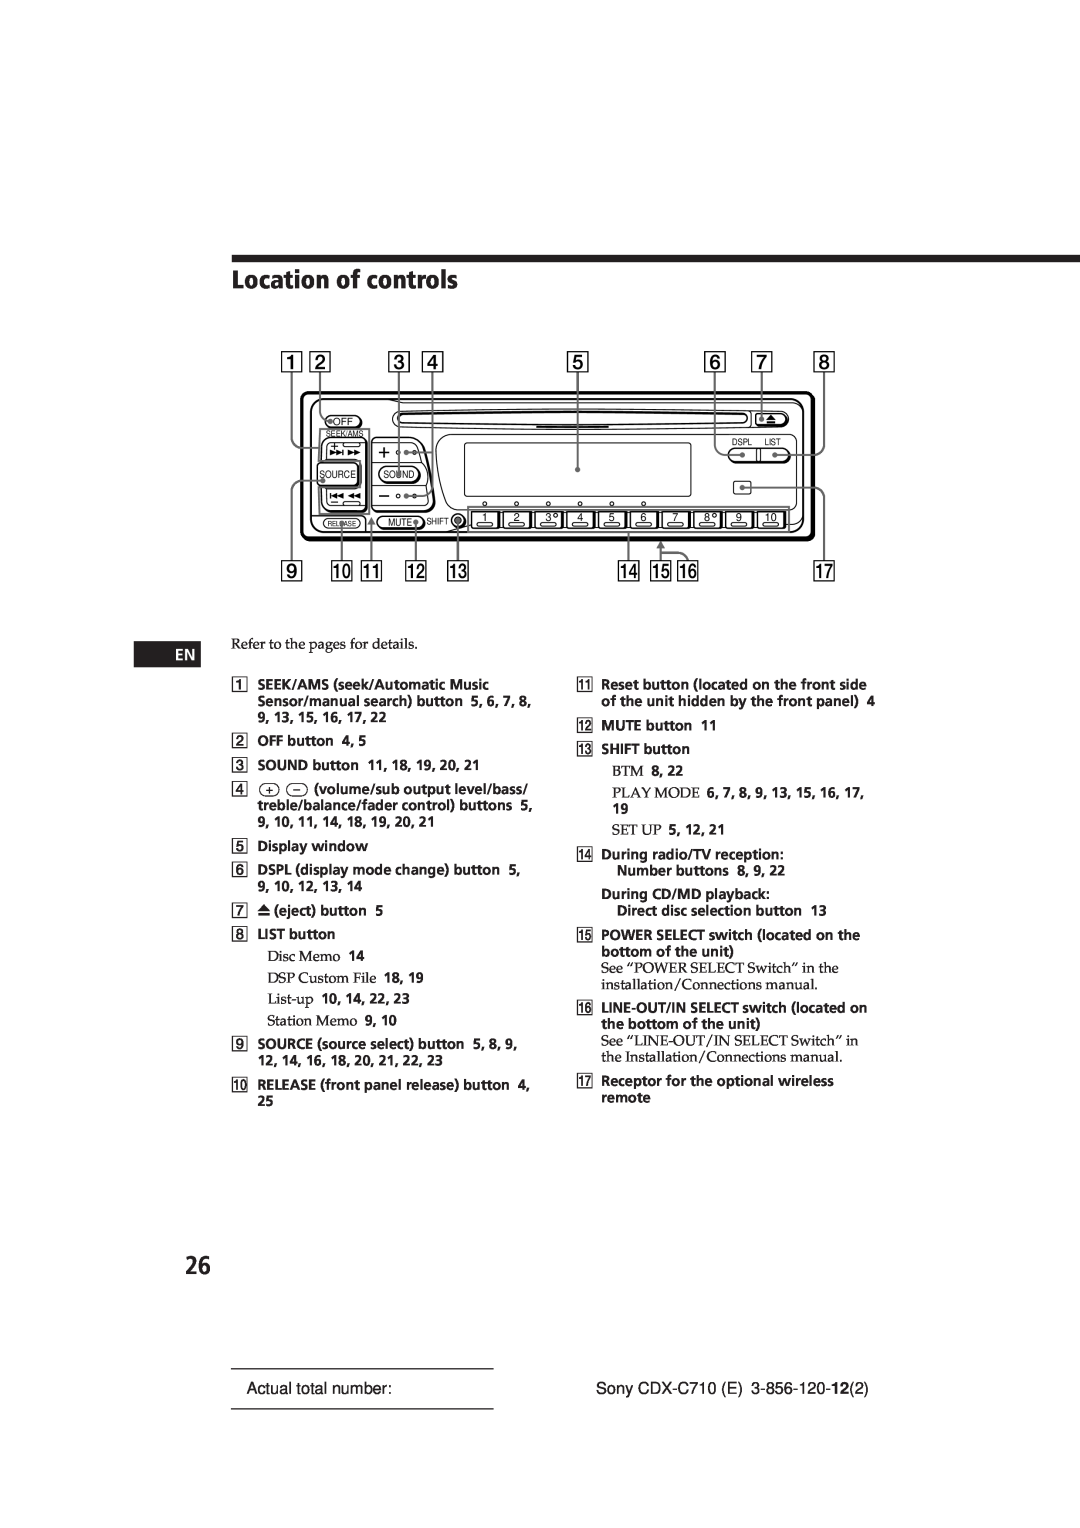 Sony CDX-C710 manual Location of controls, Actual total number 